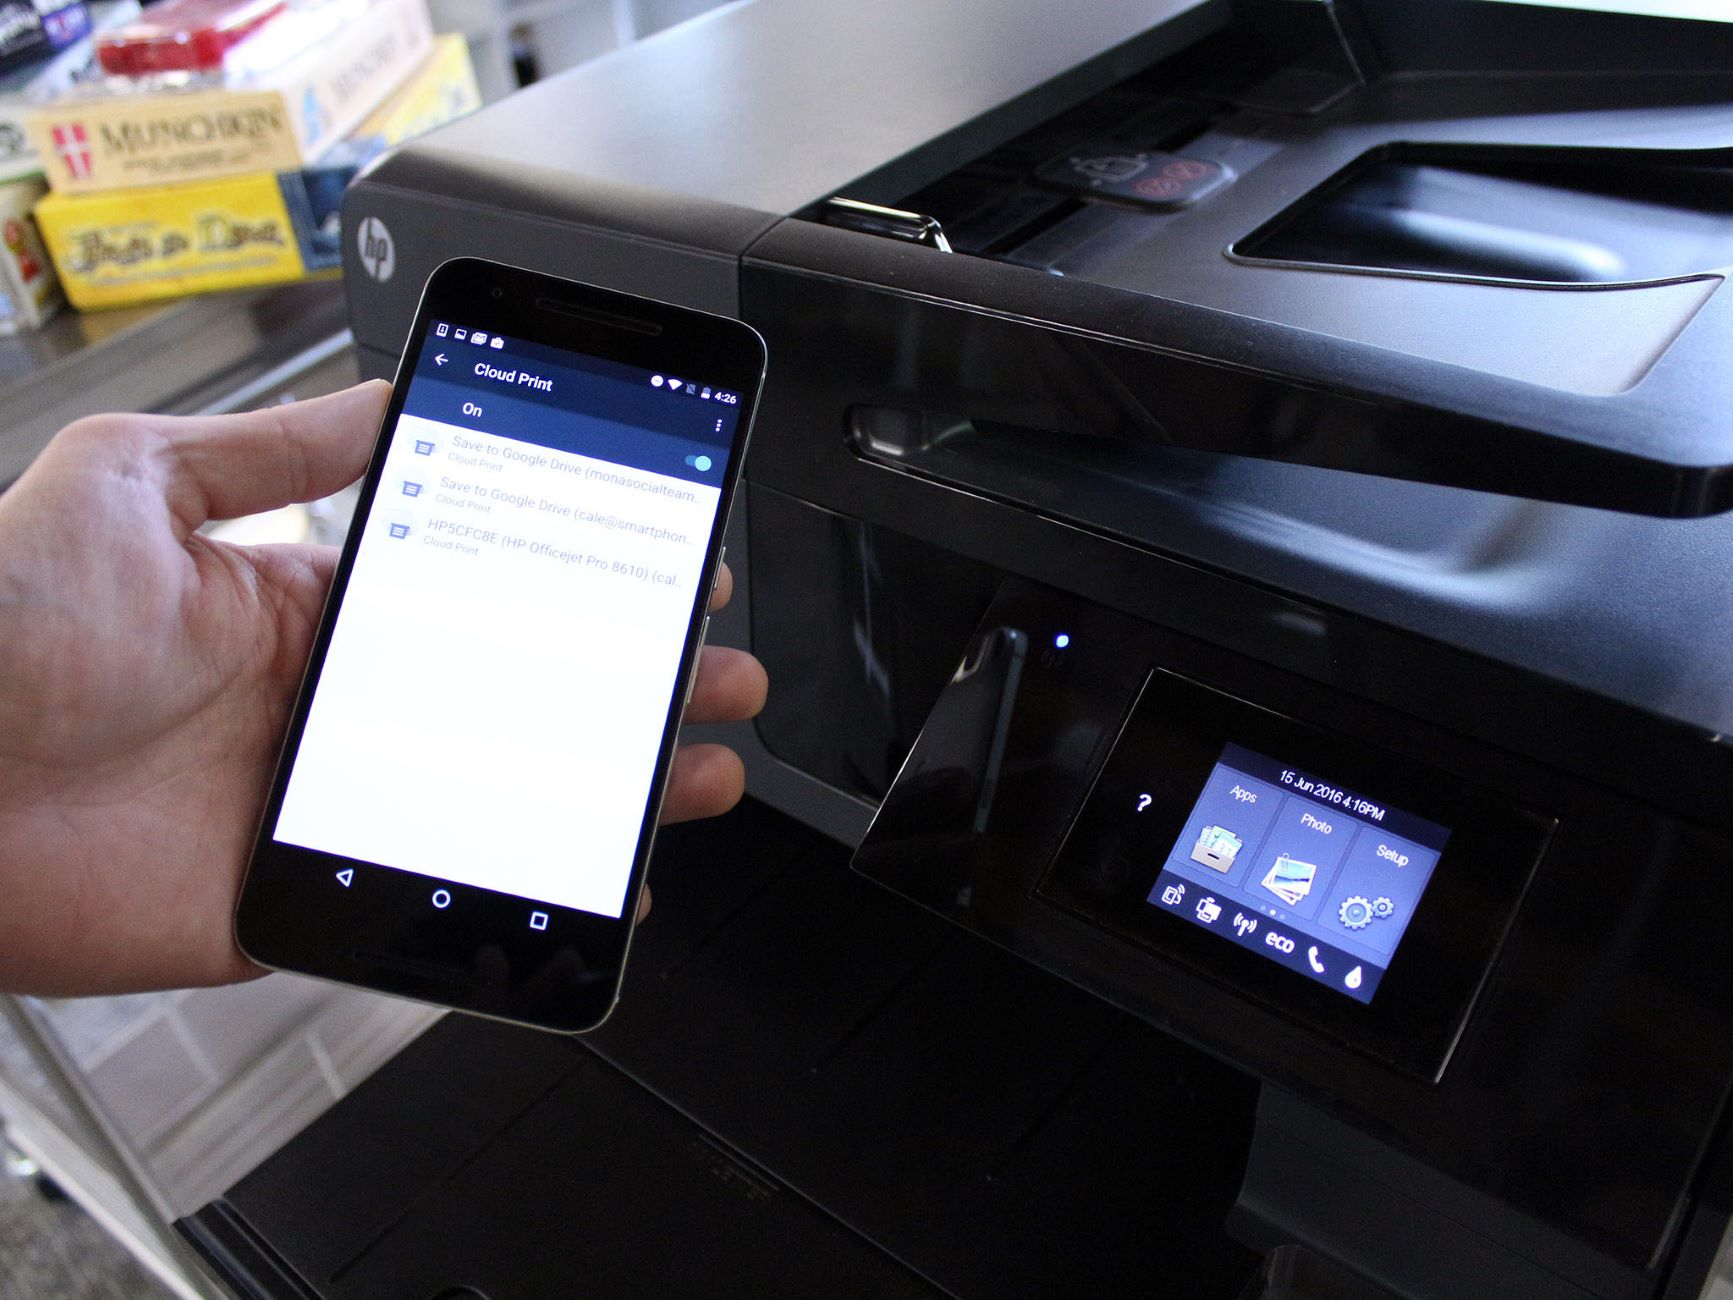 How To Print From Android Phone To HP Printer